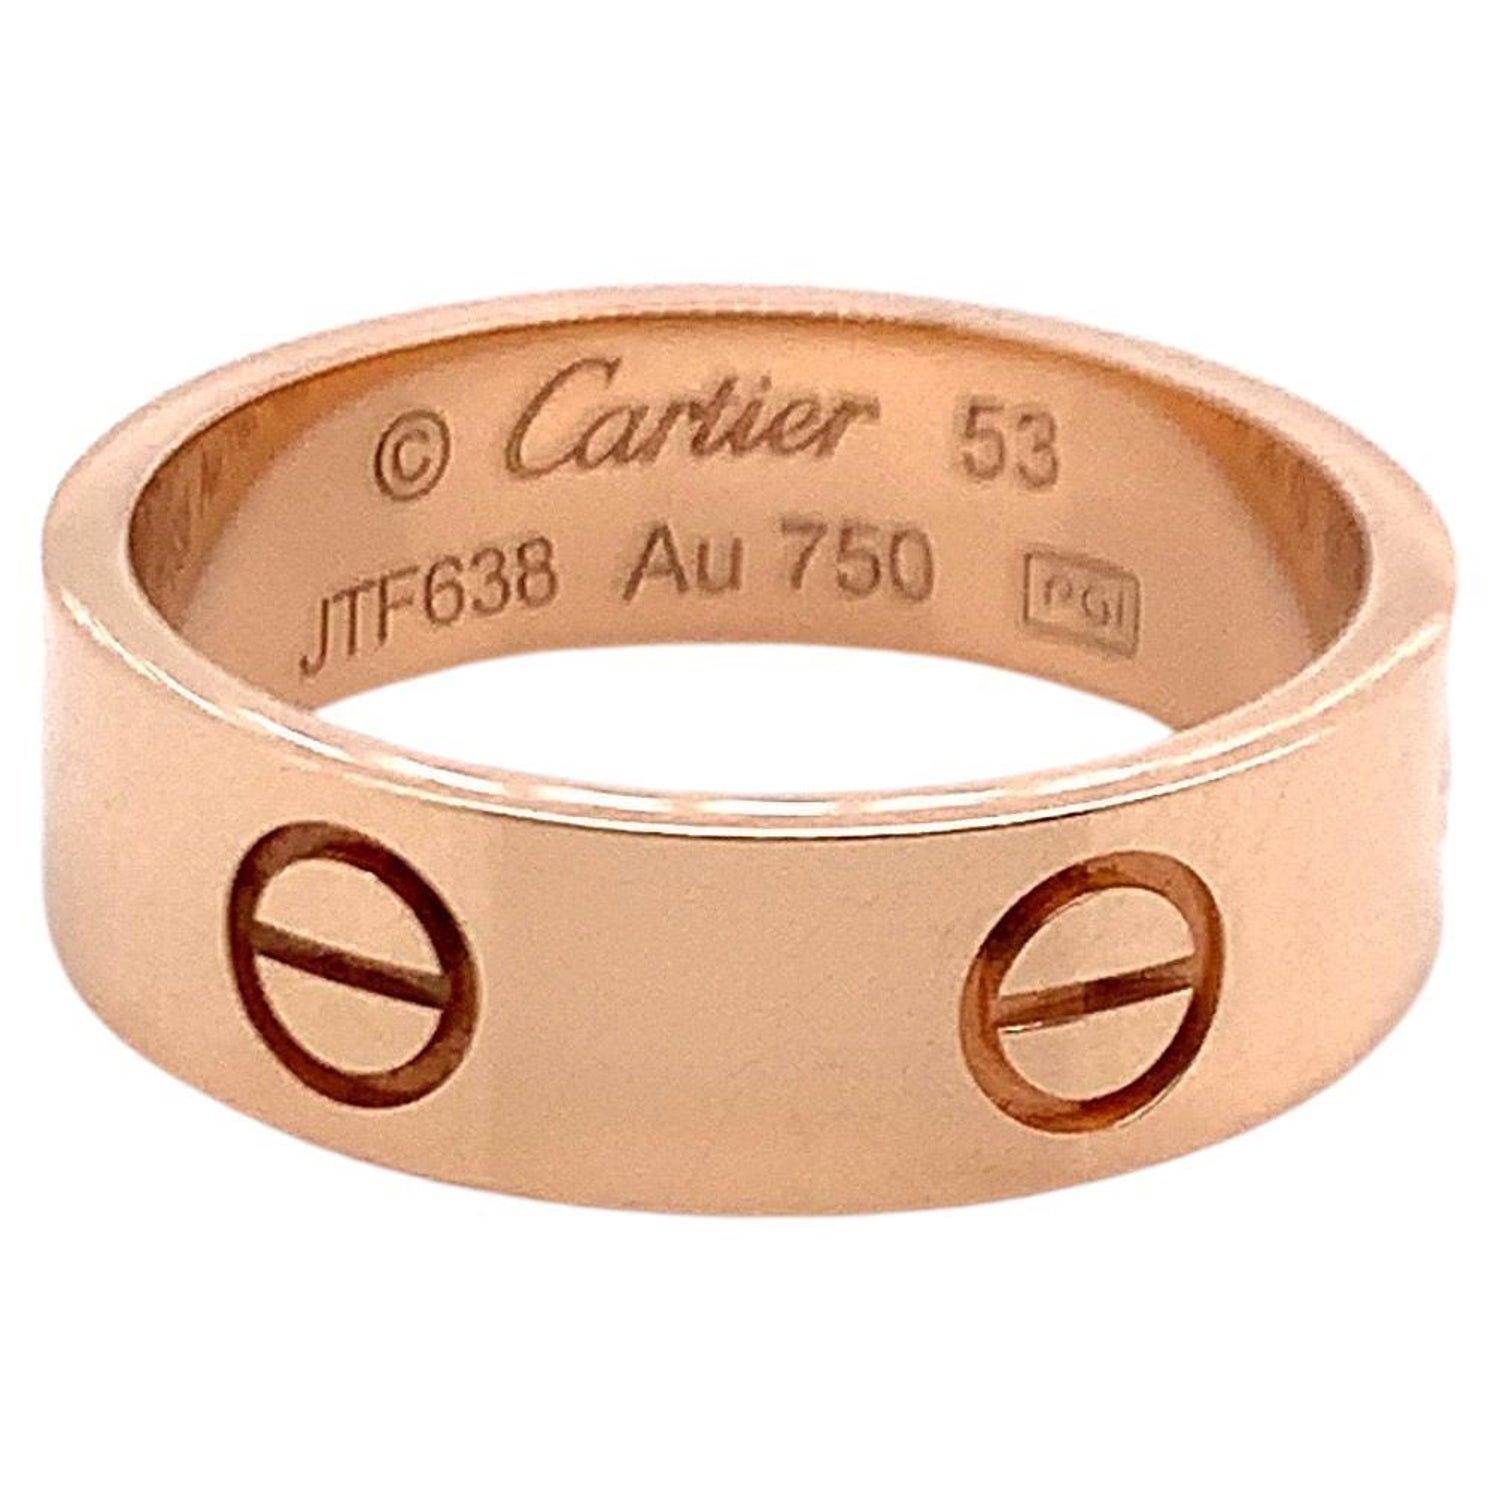 Does Cartier rose gold fade? - Questions & Answers | 1stDibs